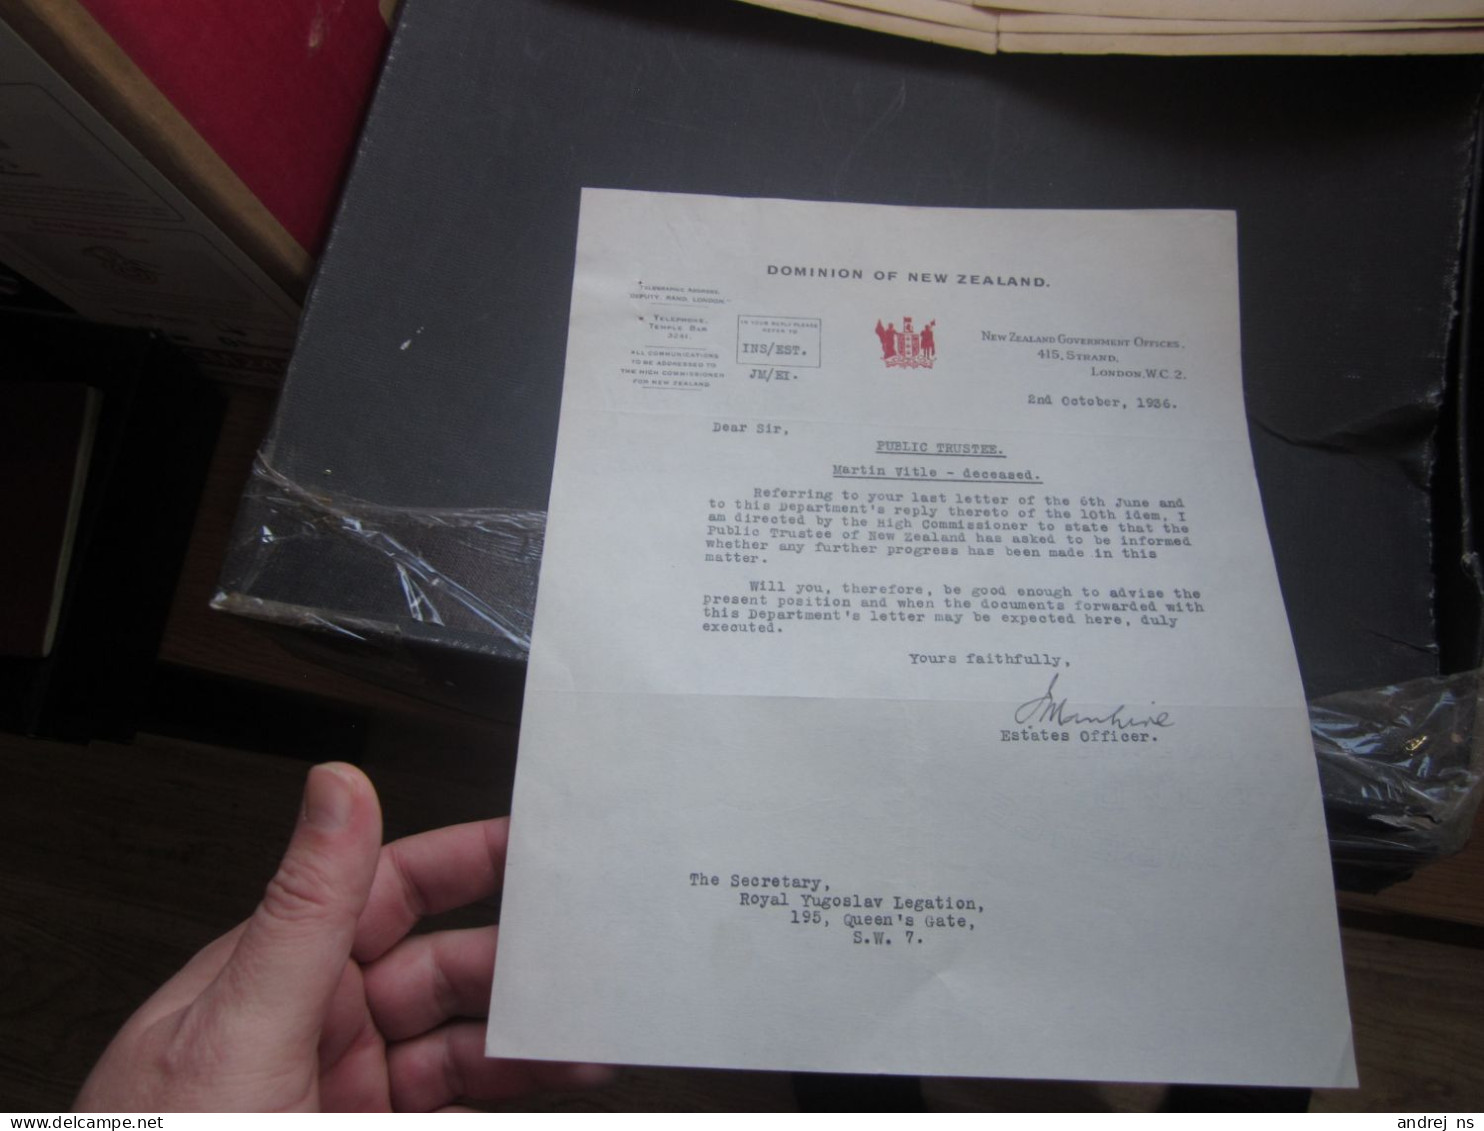 Dominion Of New Zealand 1936 Estates Officer Signatures  New Zealand Governments Offices London - United Kingdom